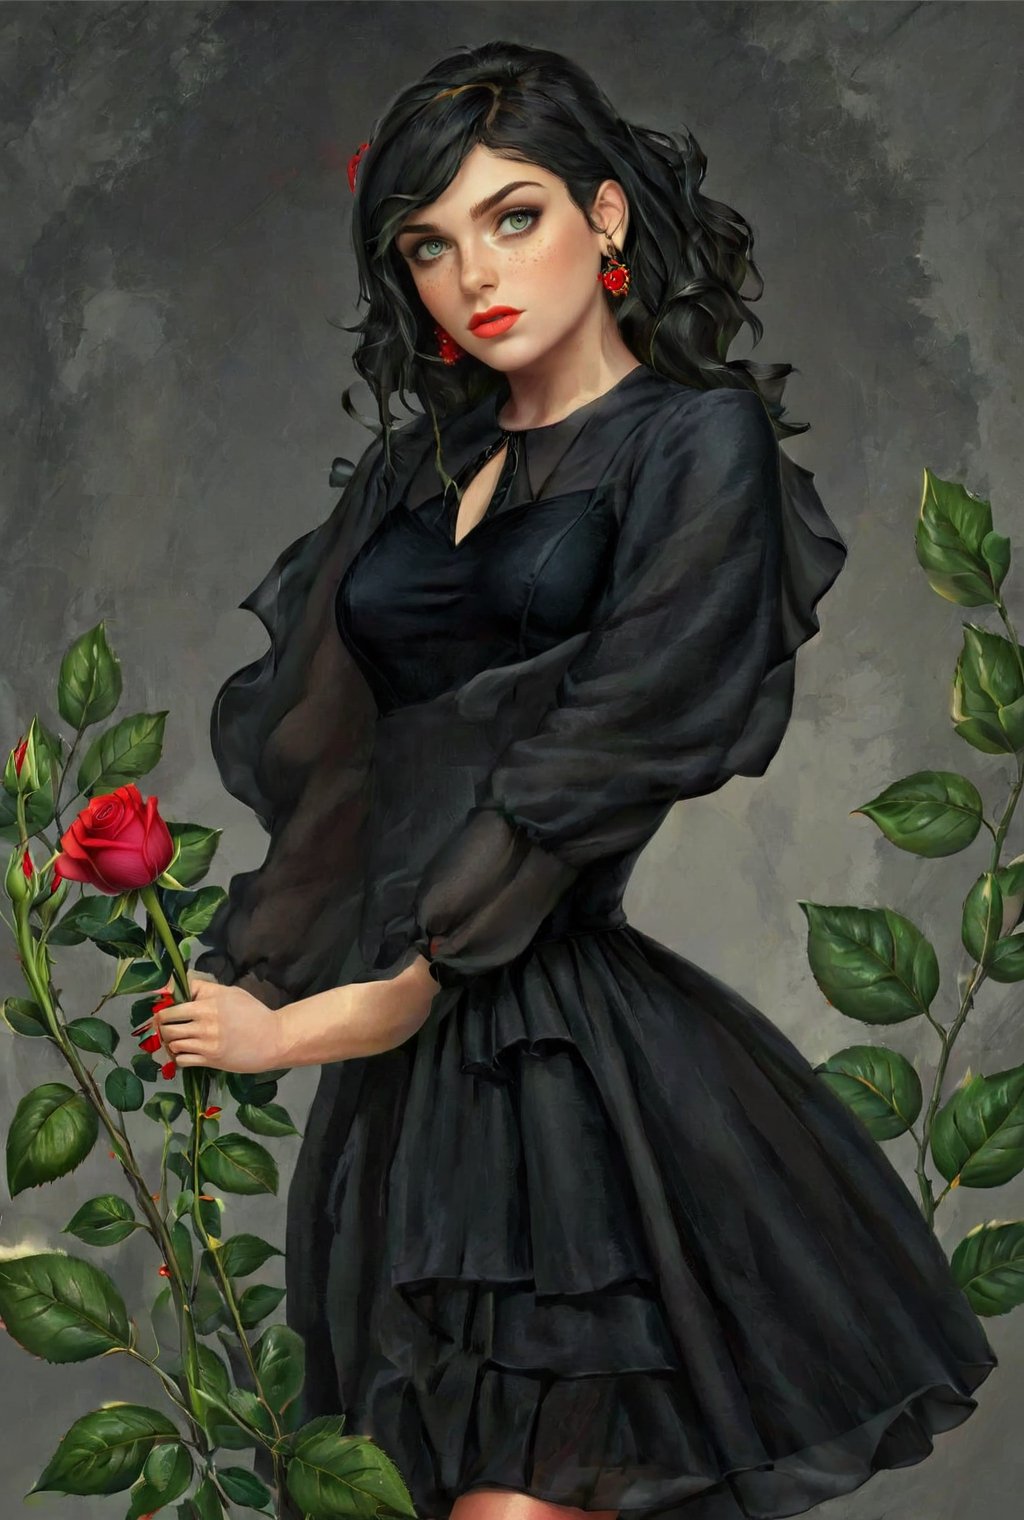 Woman wearing black dresses holds red rose